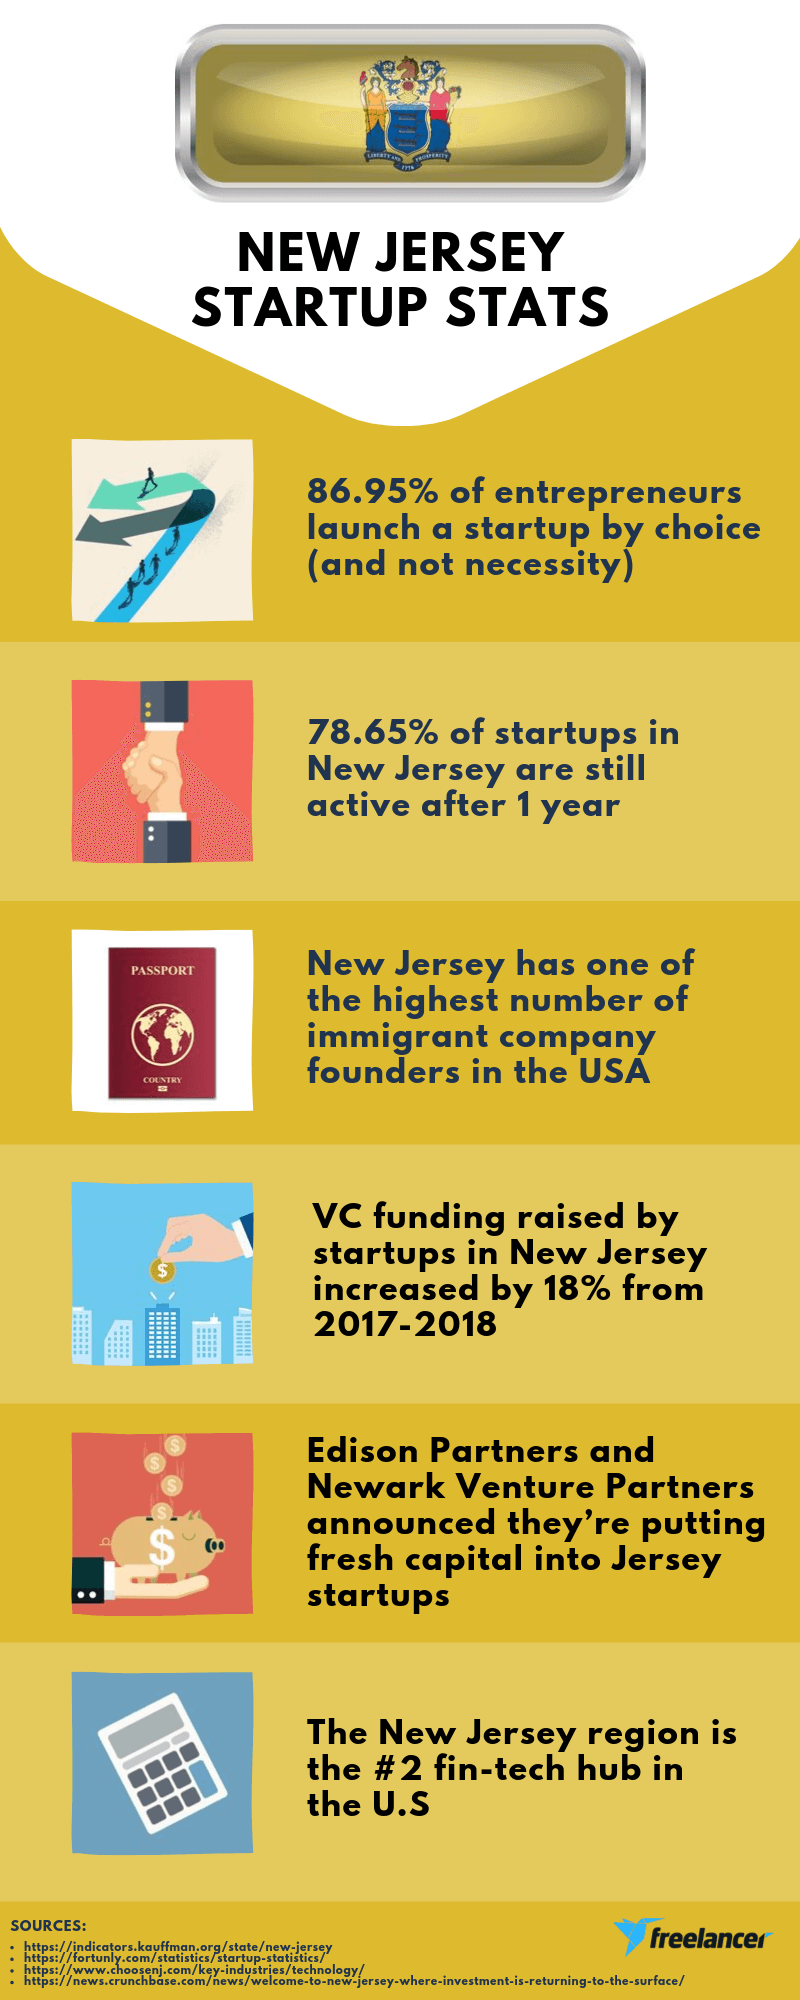 New Jersey Startup Stats infographic